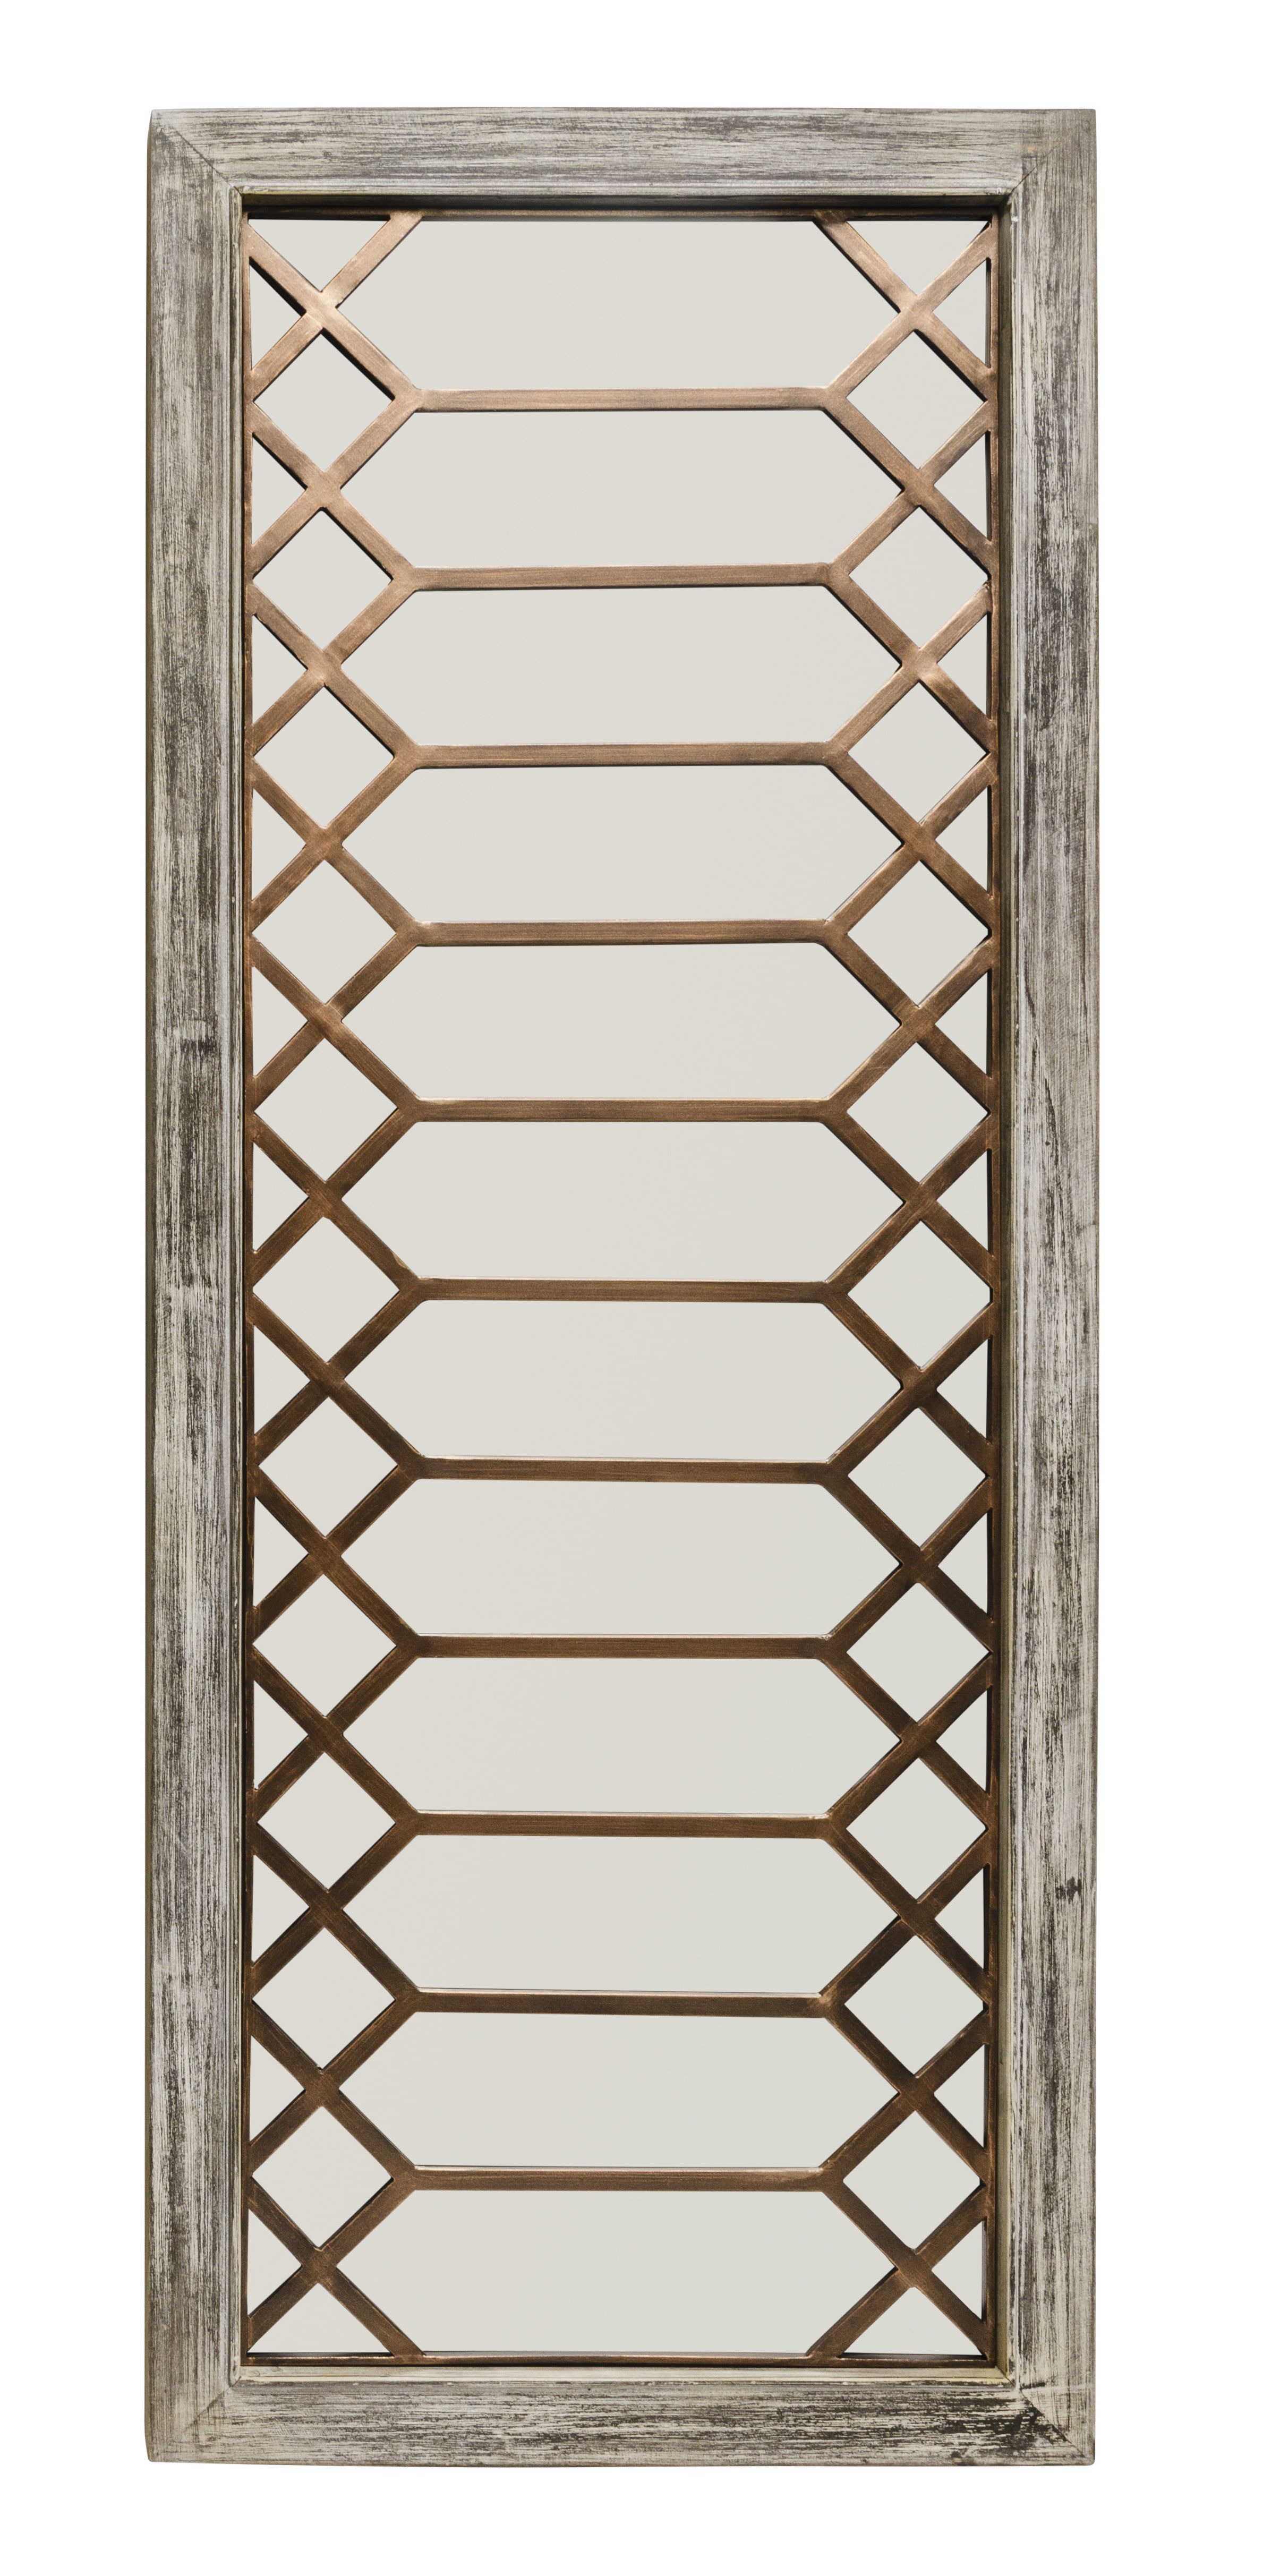 Latest Tellier Accent Wall Mirrors Regarding Polito Cottage/country Wall Mirror (View 9 of 20)